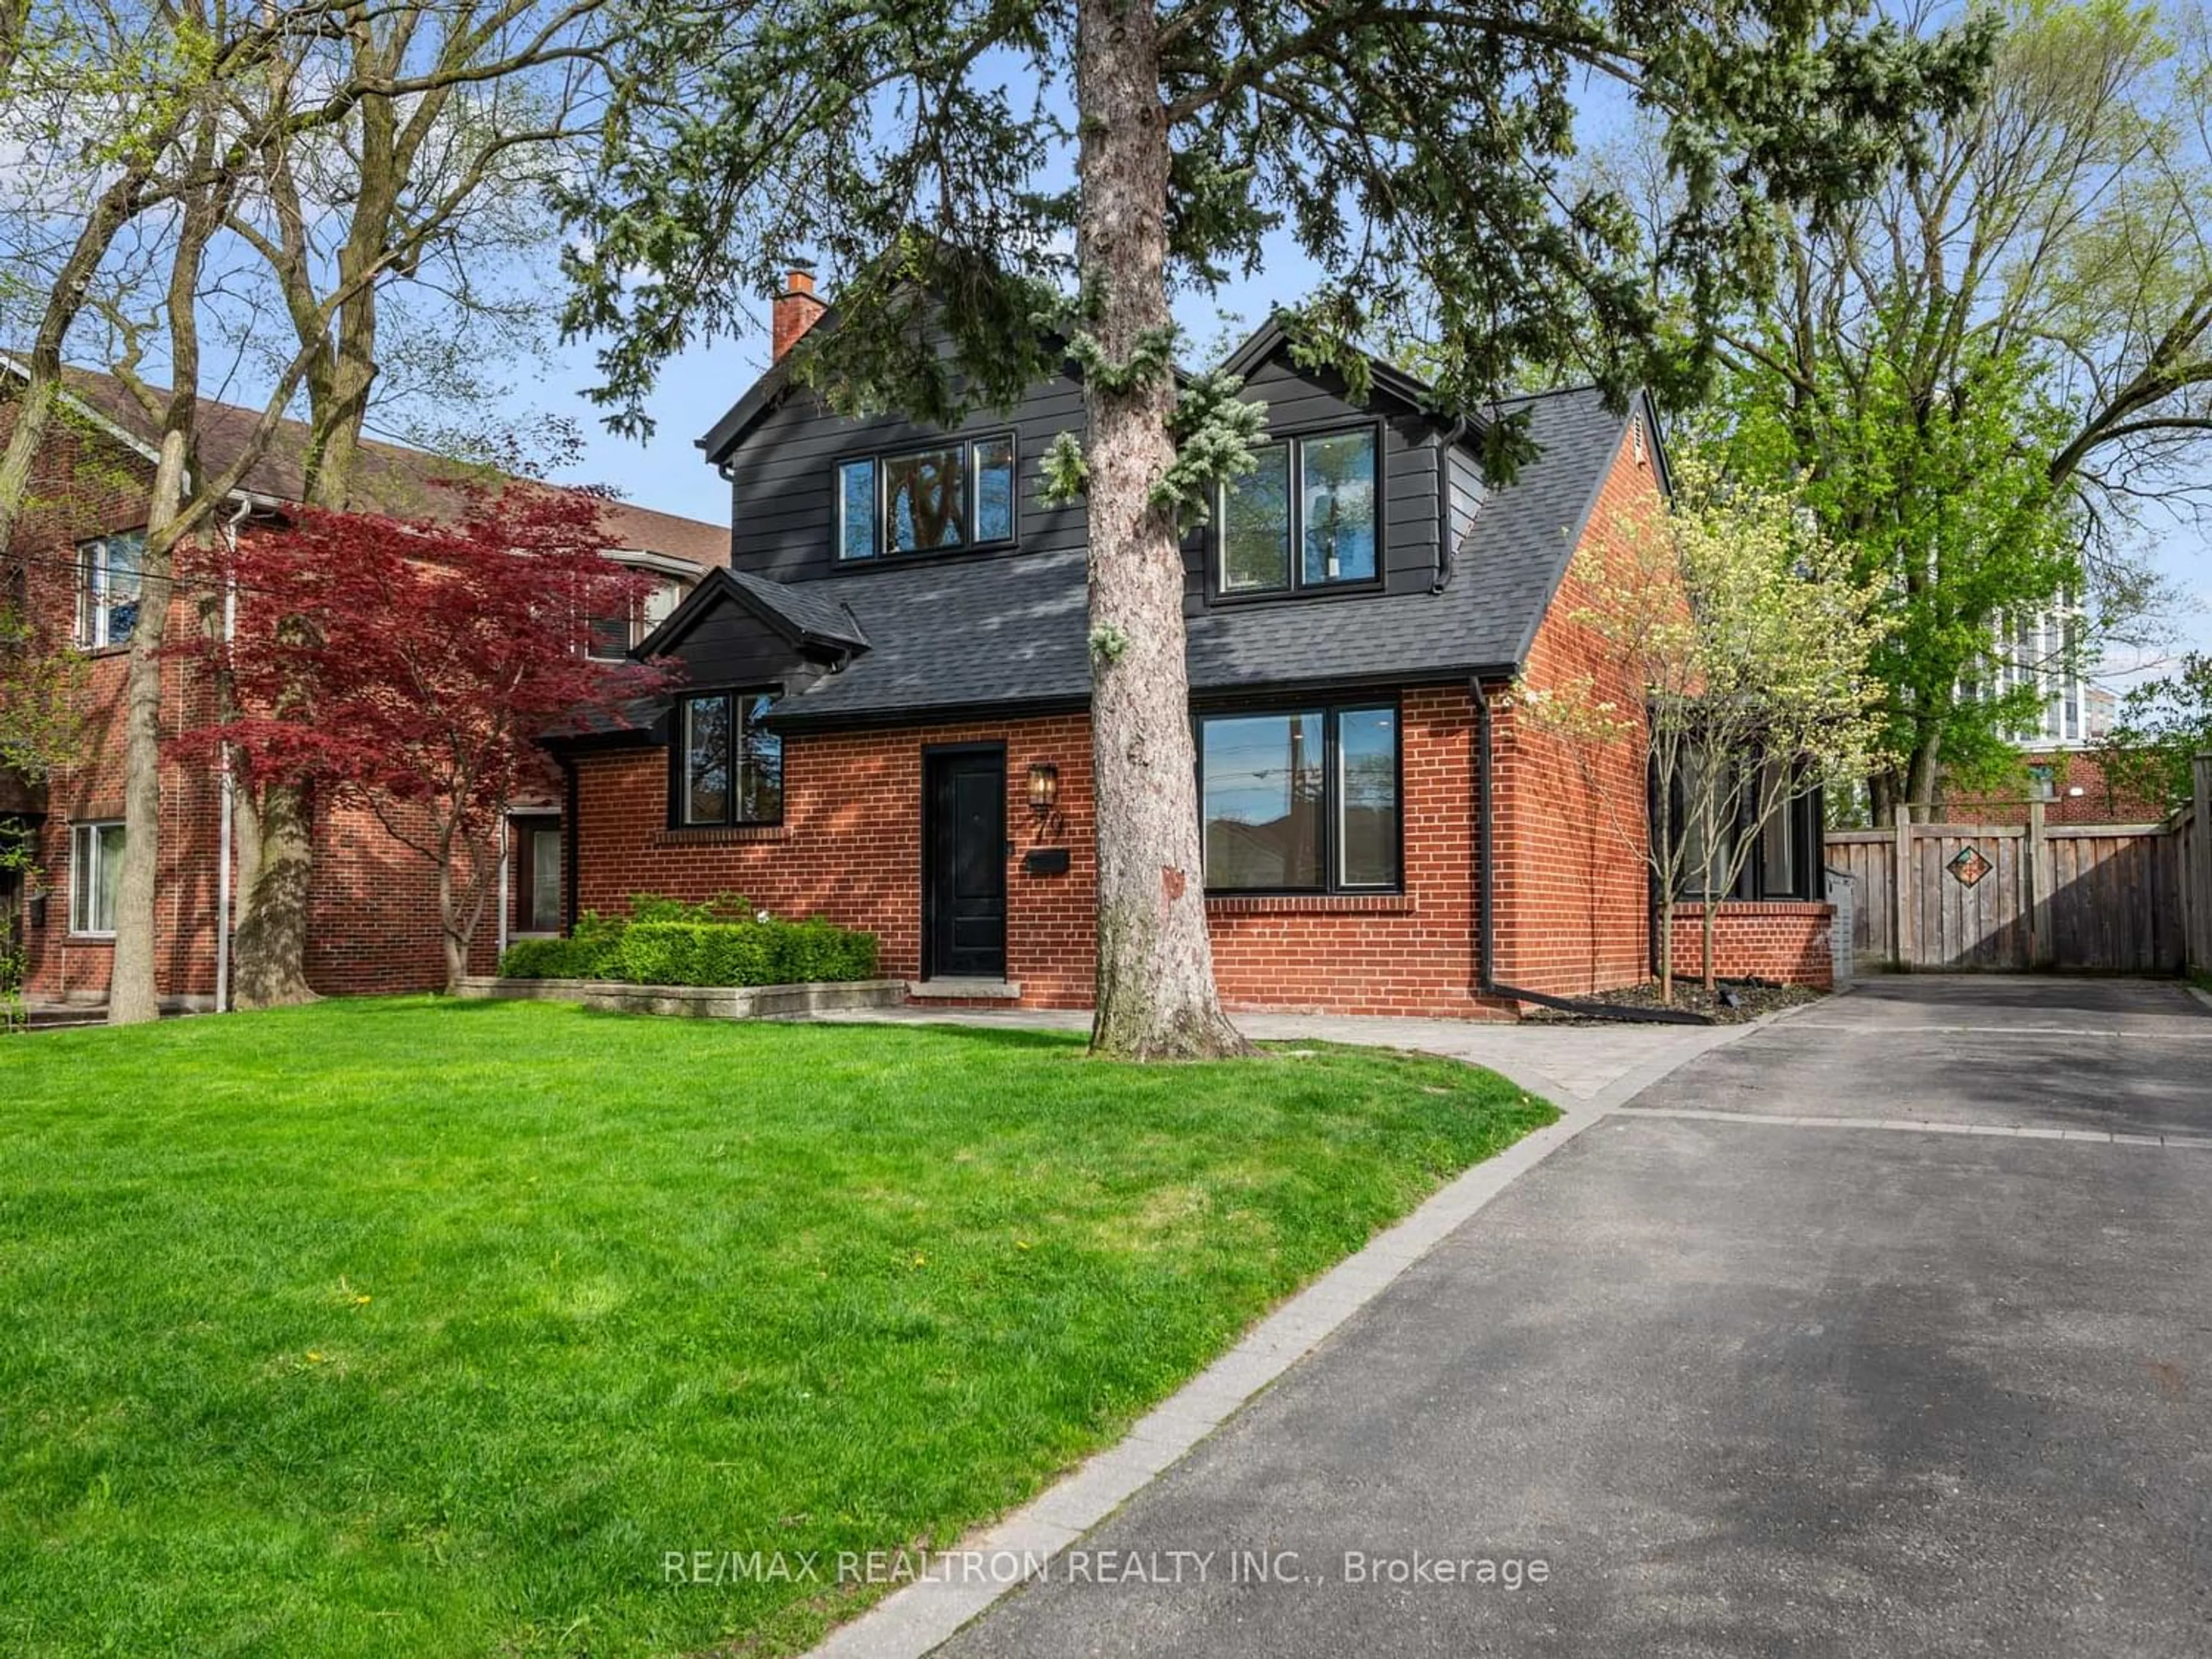 Home with brick exterior material for 79 Brucewood Cres, Toronto Ontario M6A 2G9